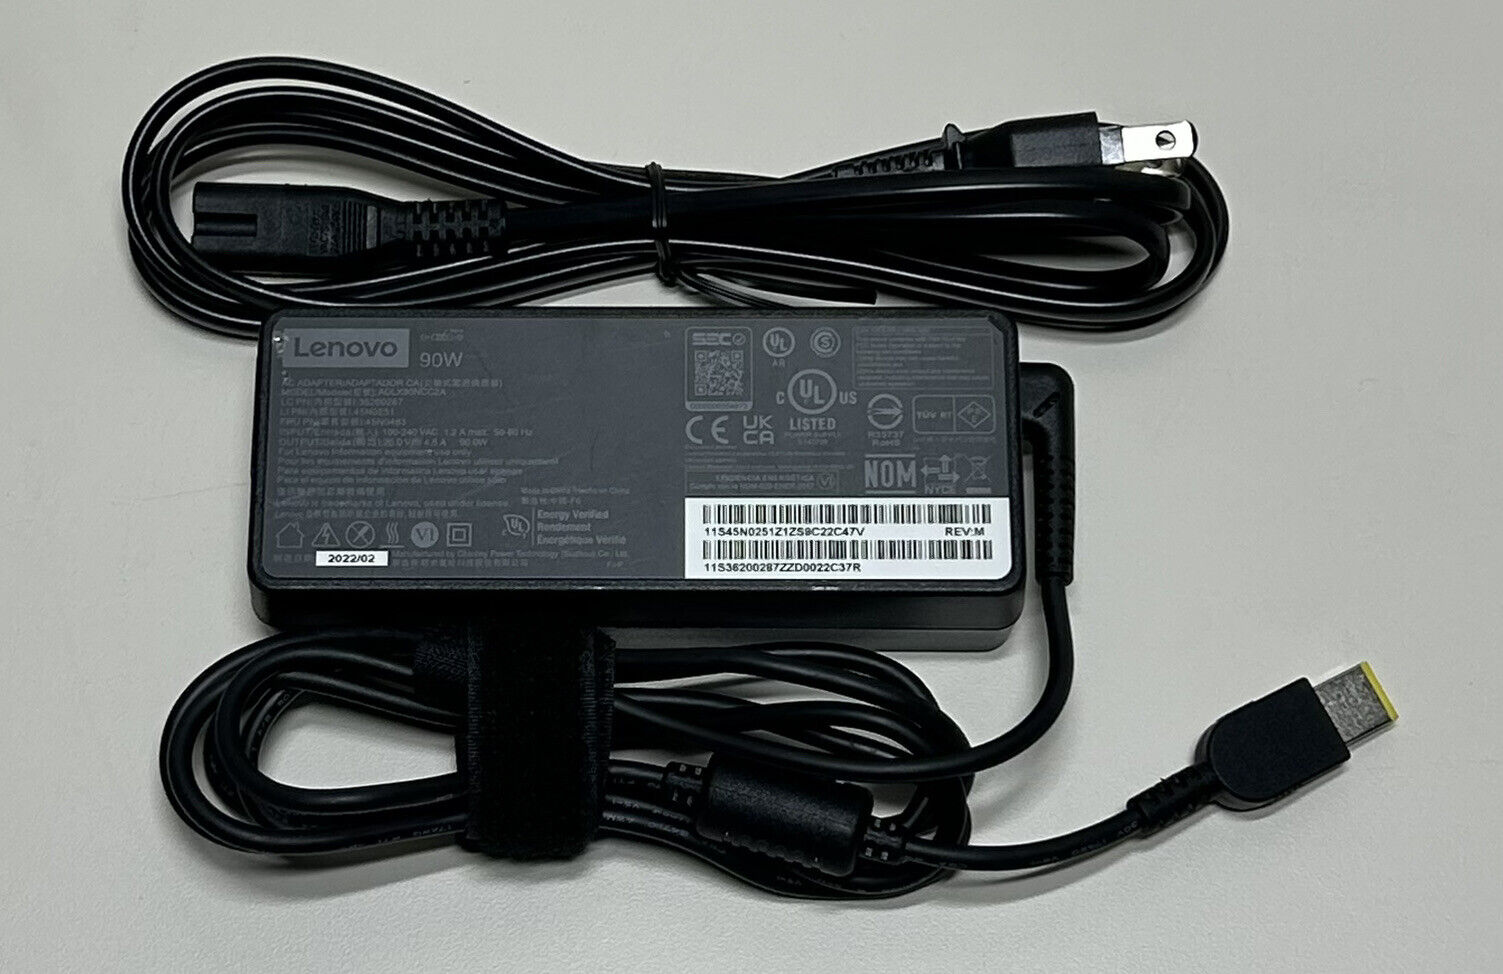 LOT OF 10 Genuine Lenovo 90W AC Power Adapter ThinkPad Laptop Charger Square Tip